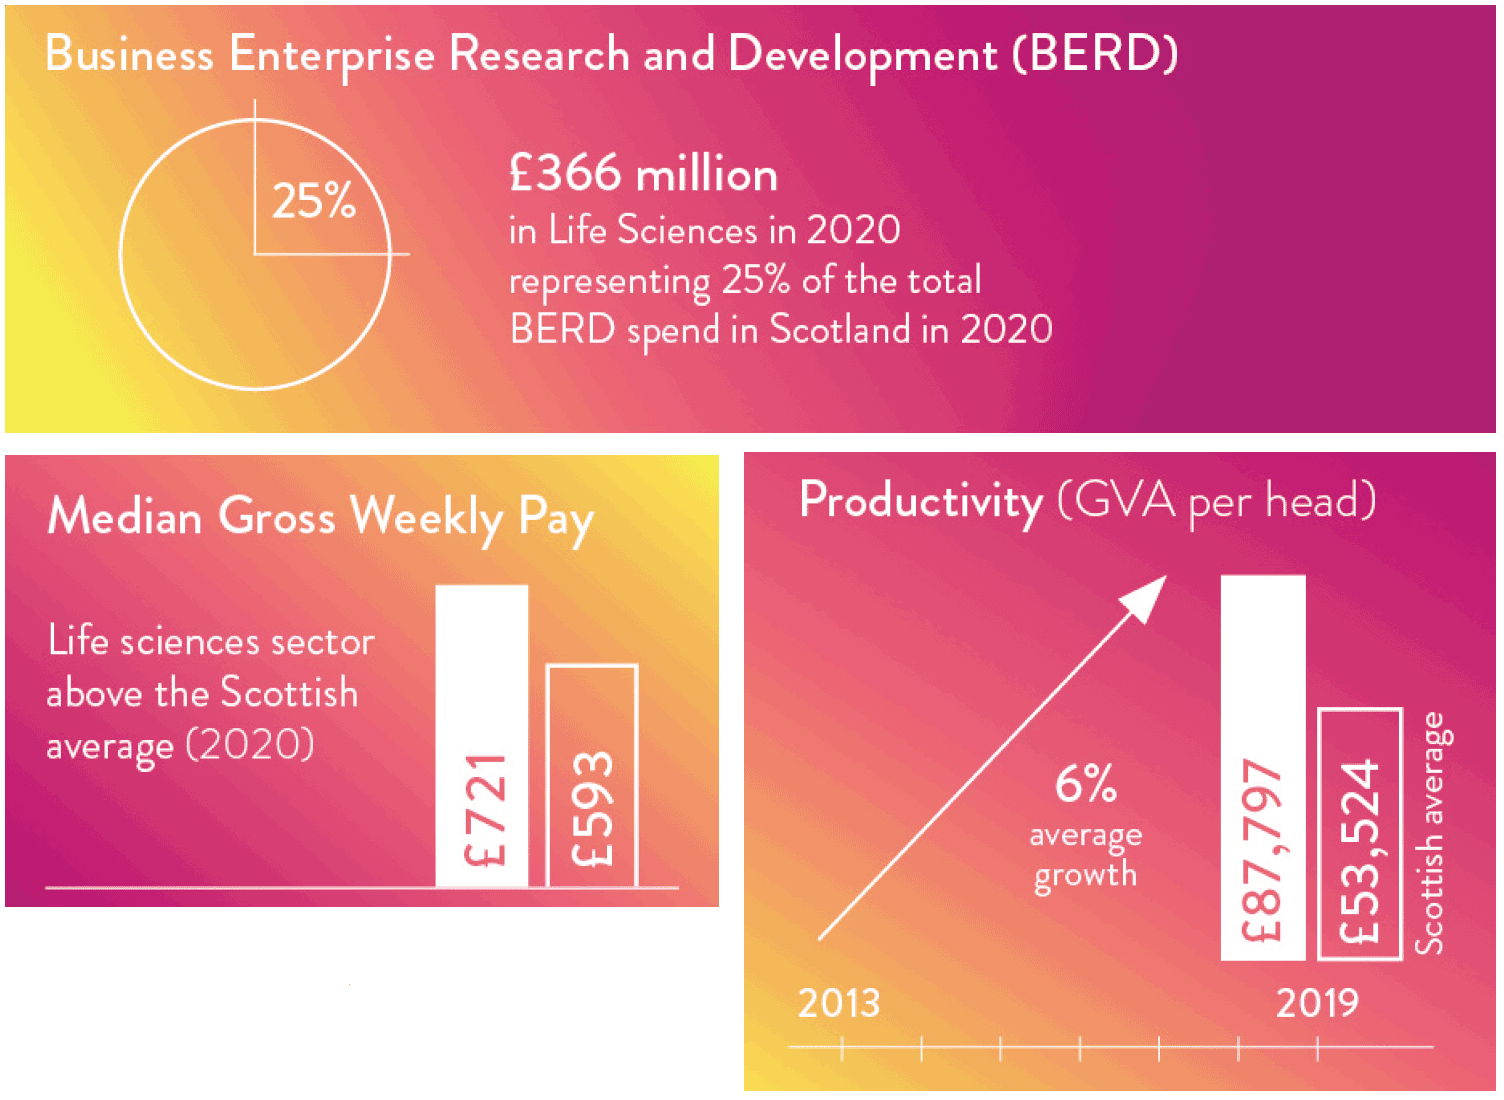 Chart showing the proportion of Business Enterprise Research and Development spend in the Life Sciences sector in comparison with total Business Enterprise Research and Development spend in Scotland in 2020. Median pay in the life sciences sector in comparison with average median pay across Scotland in 2020. Average growth in life sciences Gross Value Added per head between 2013 and 2019 and in value terms the Gross Value Added per head for the life sciences sector in 2019 compared to the Scottish average.